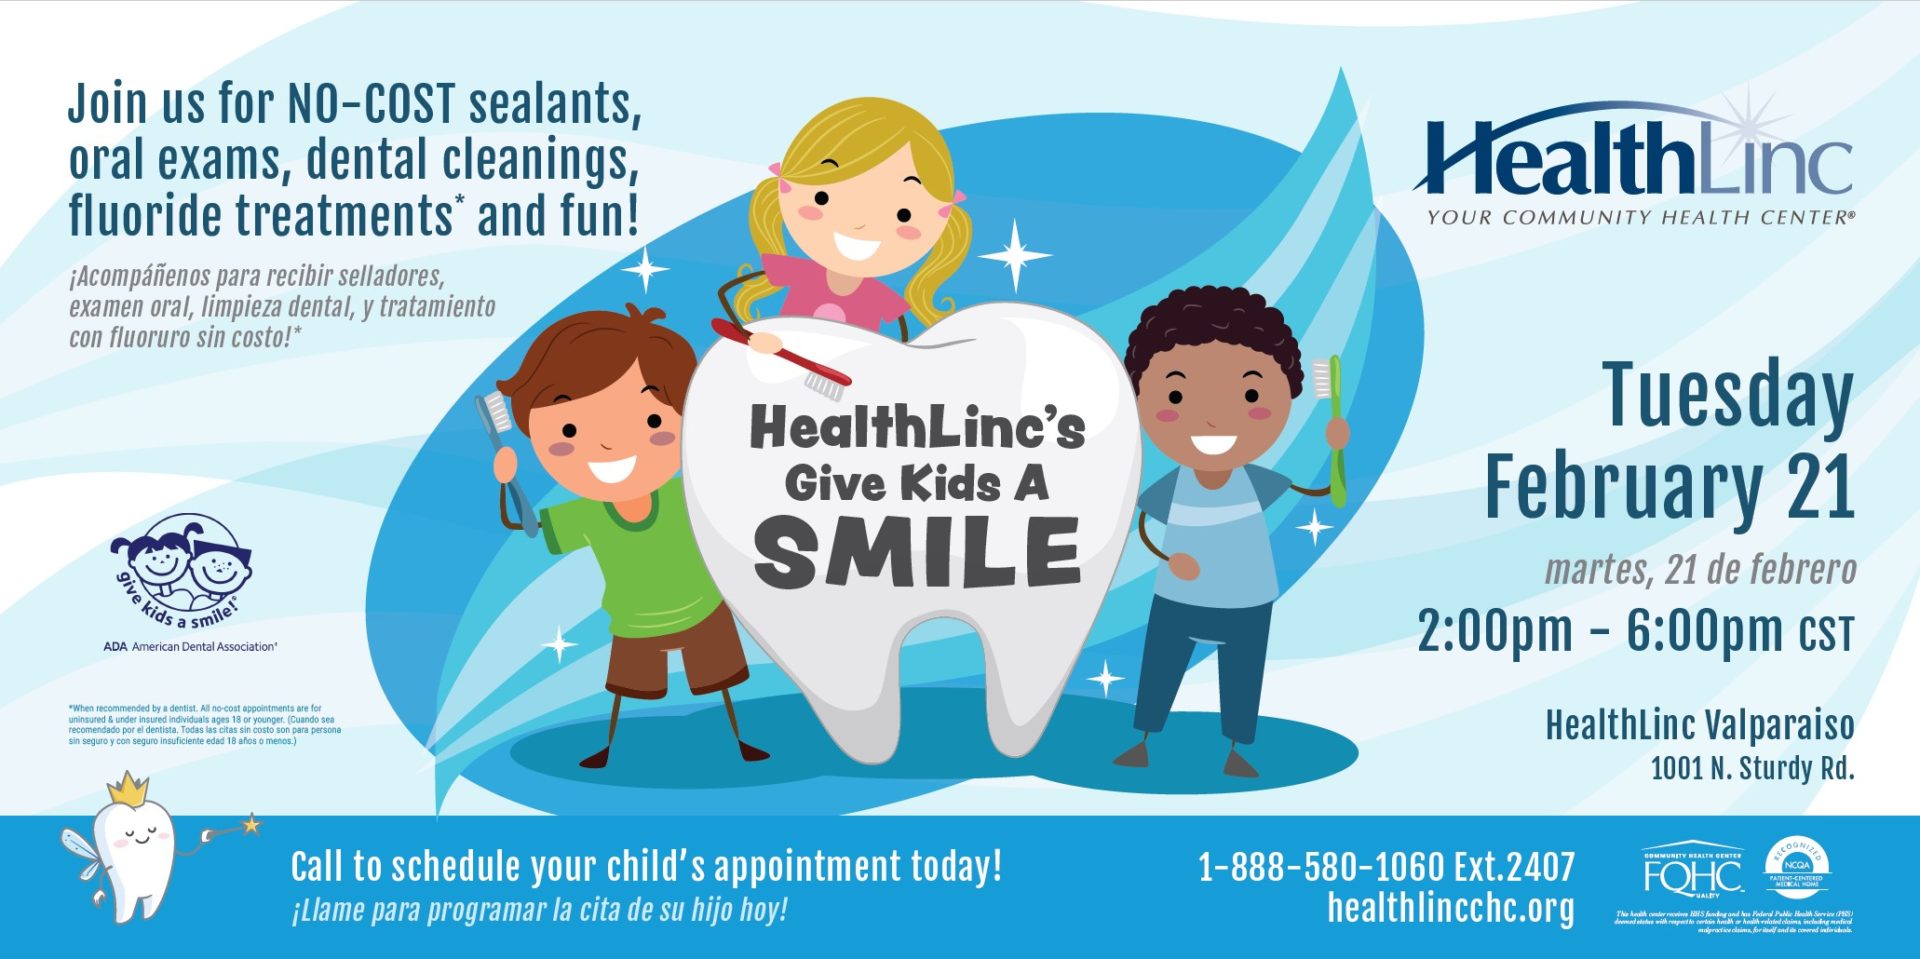 Banner for the HealthLinc Valparaiso Give Kids A Smile event that includes the date of February 21, 2023 from 2:00 p.m. - 6:00 p.m. CST that includes no-cost dental visits.